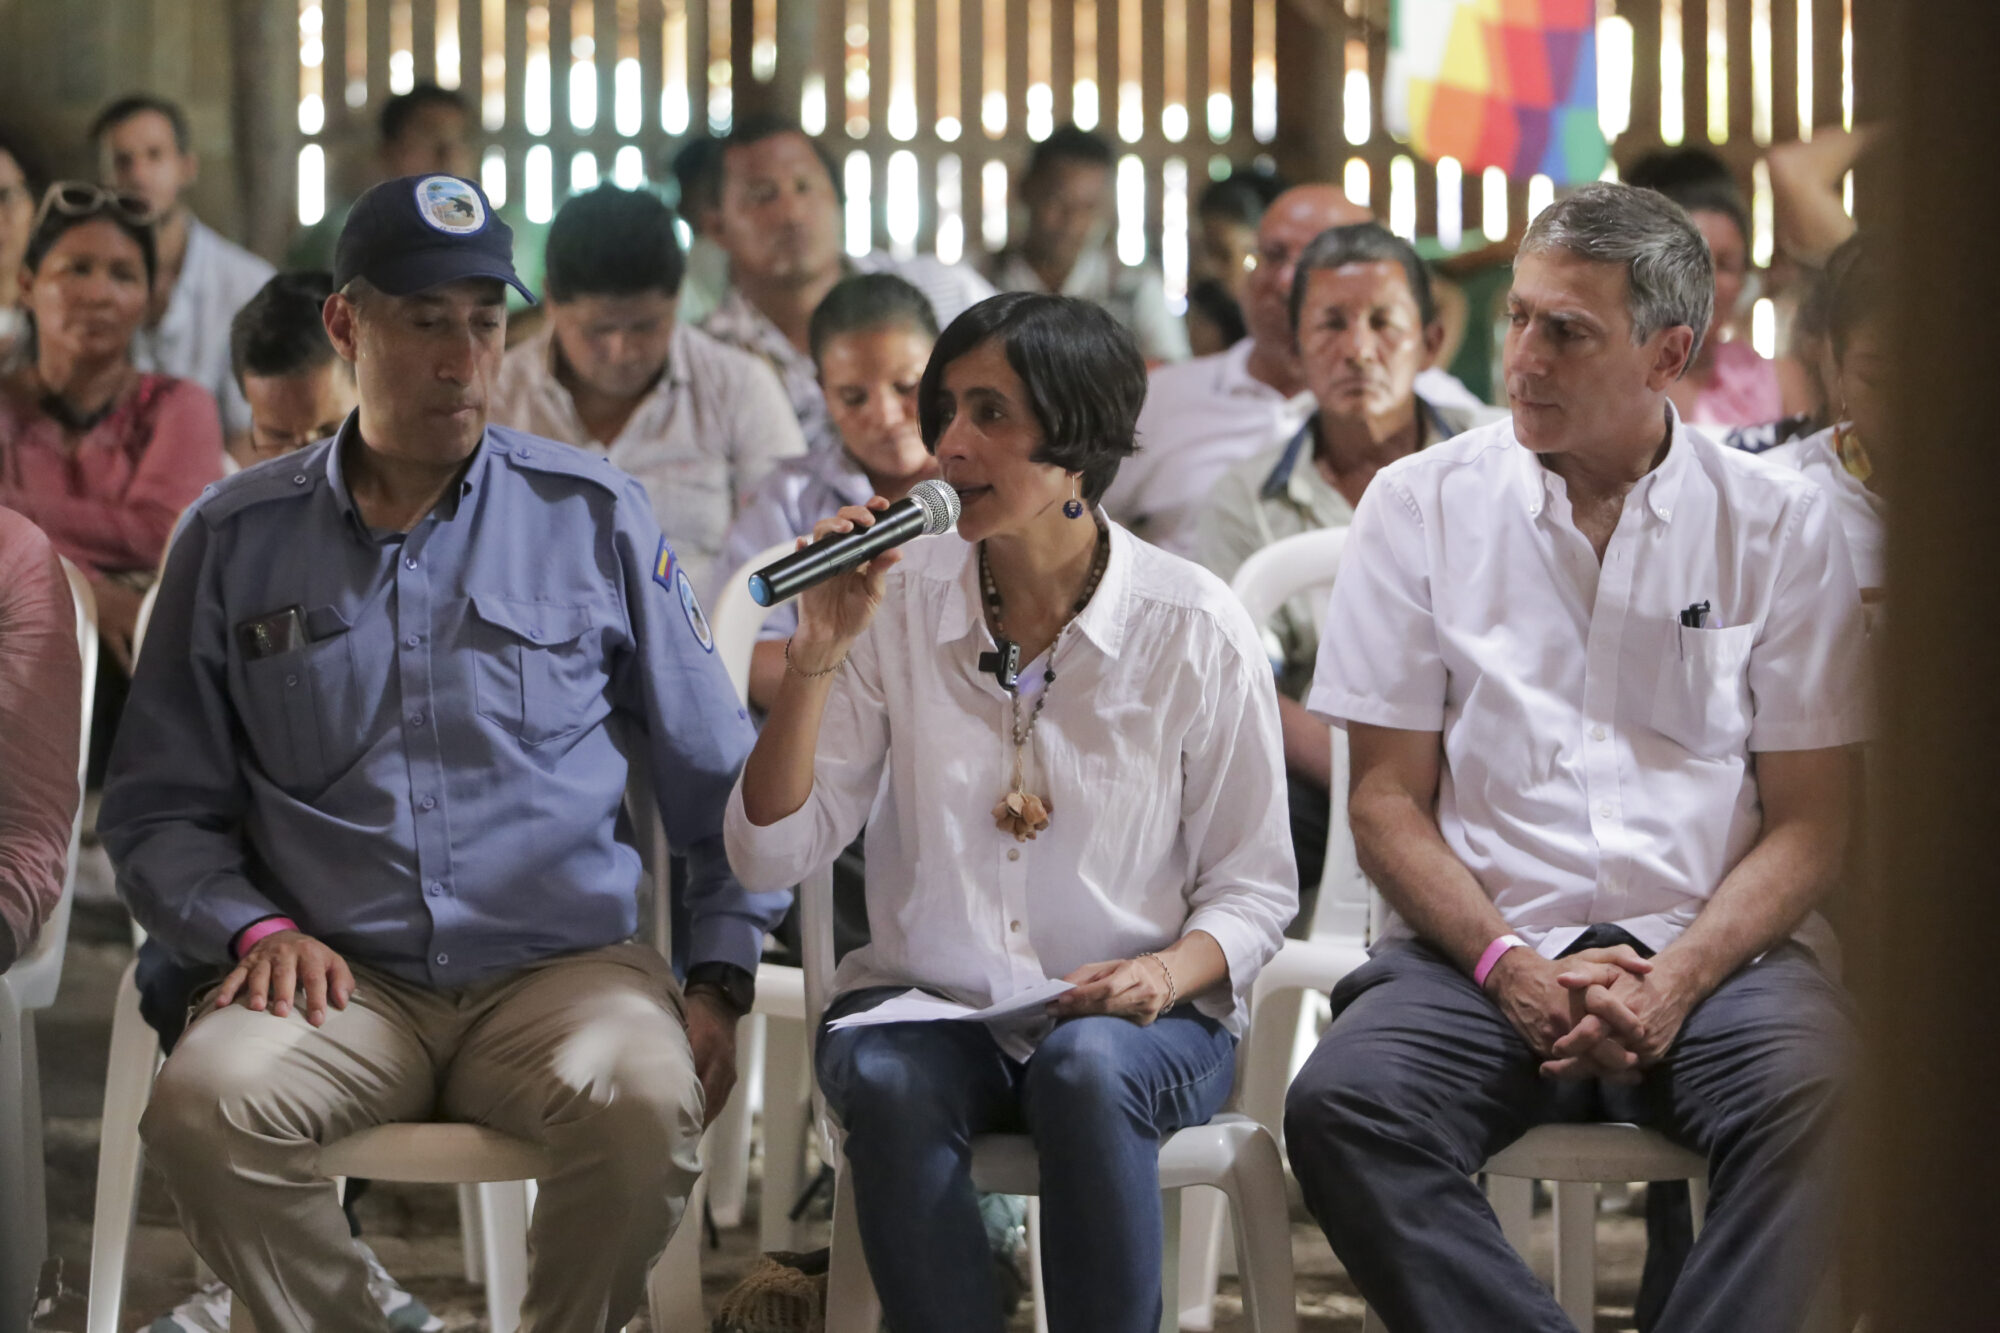 Susana Muhamad with a microphone in her hand, sitting among a group of people.